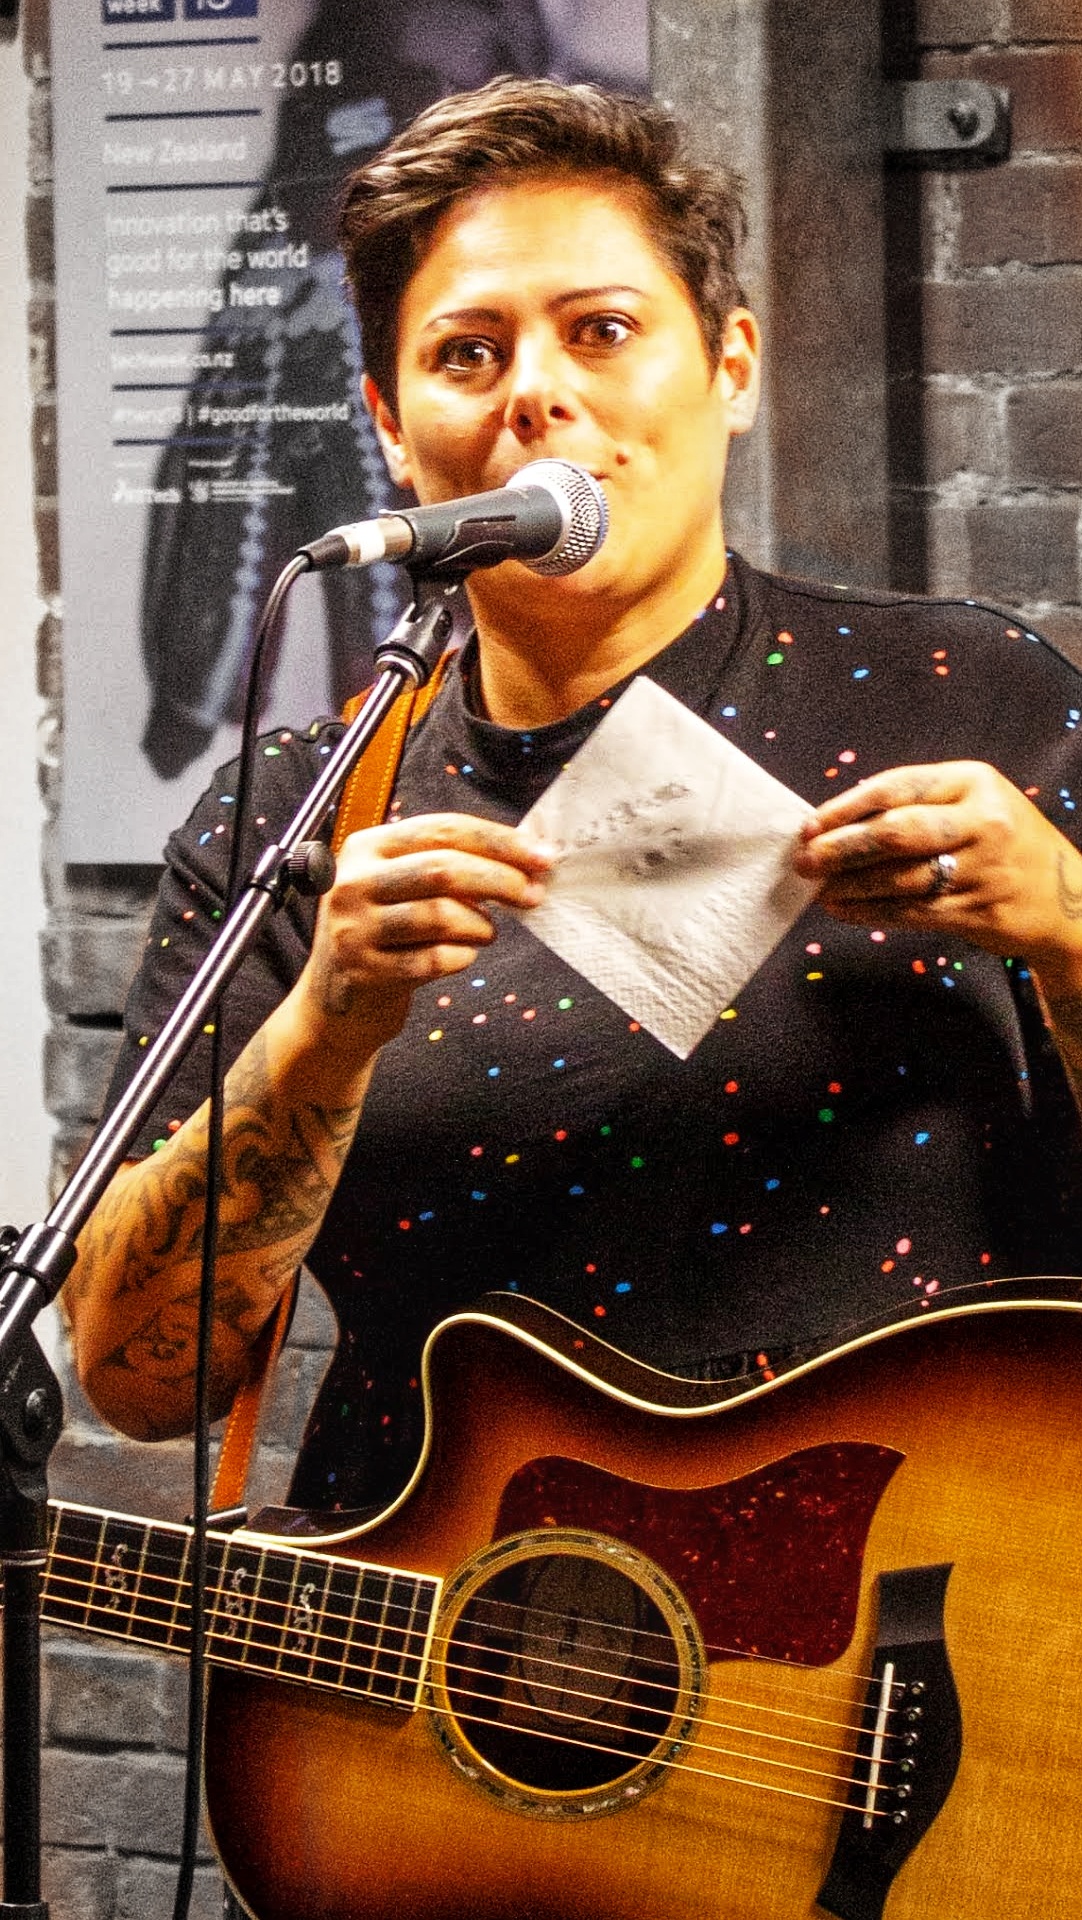 Anika Moa at a corporate event